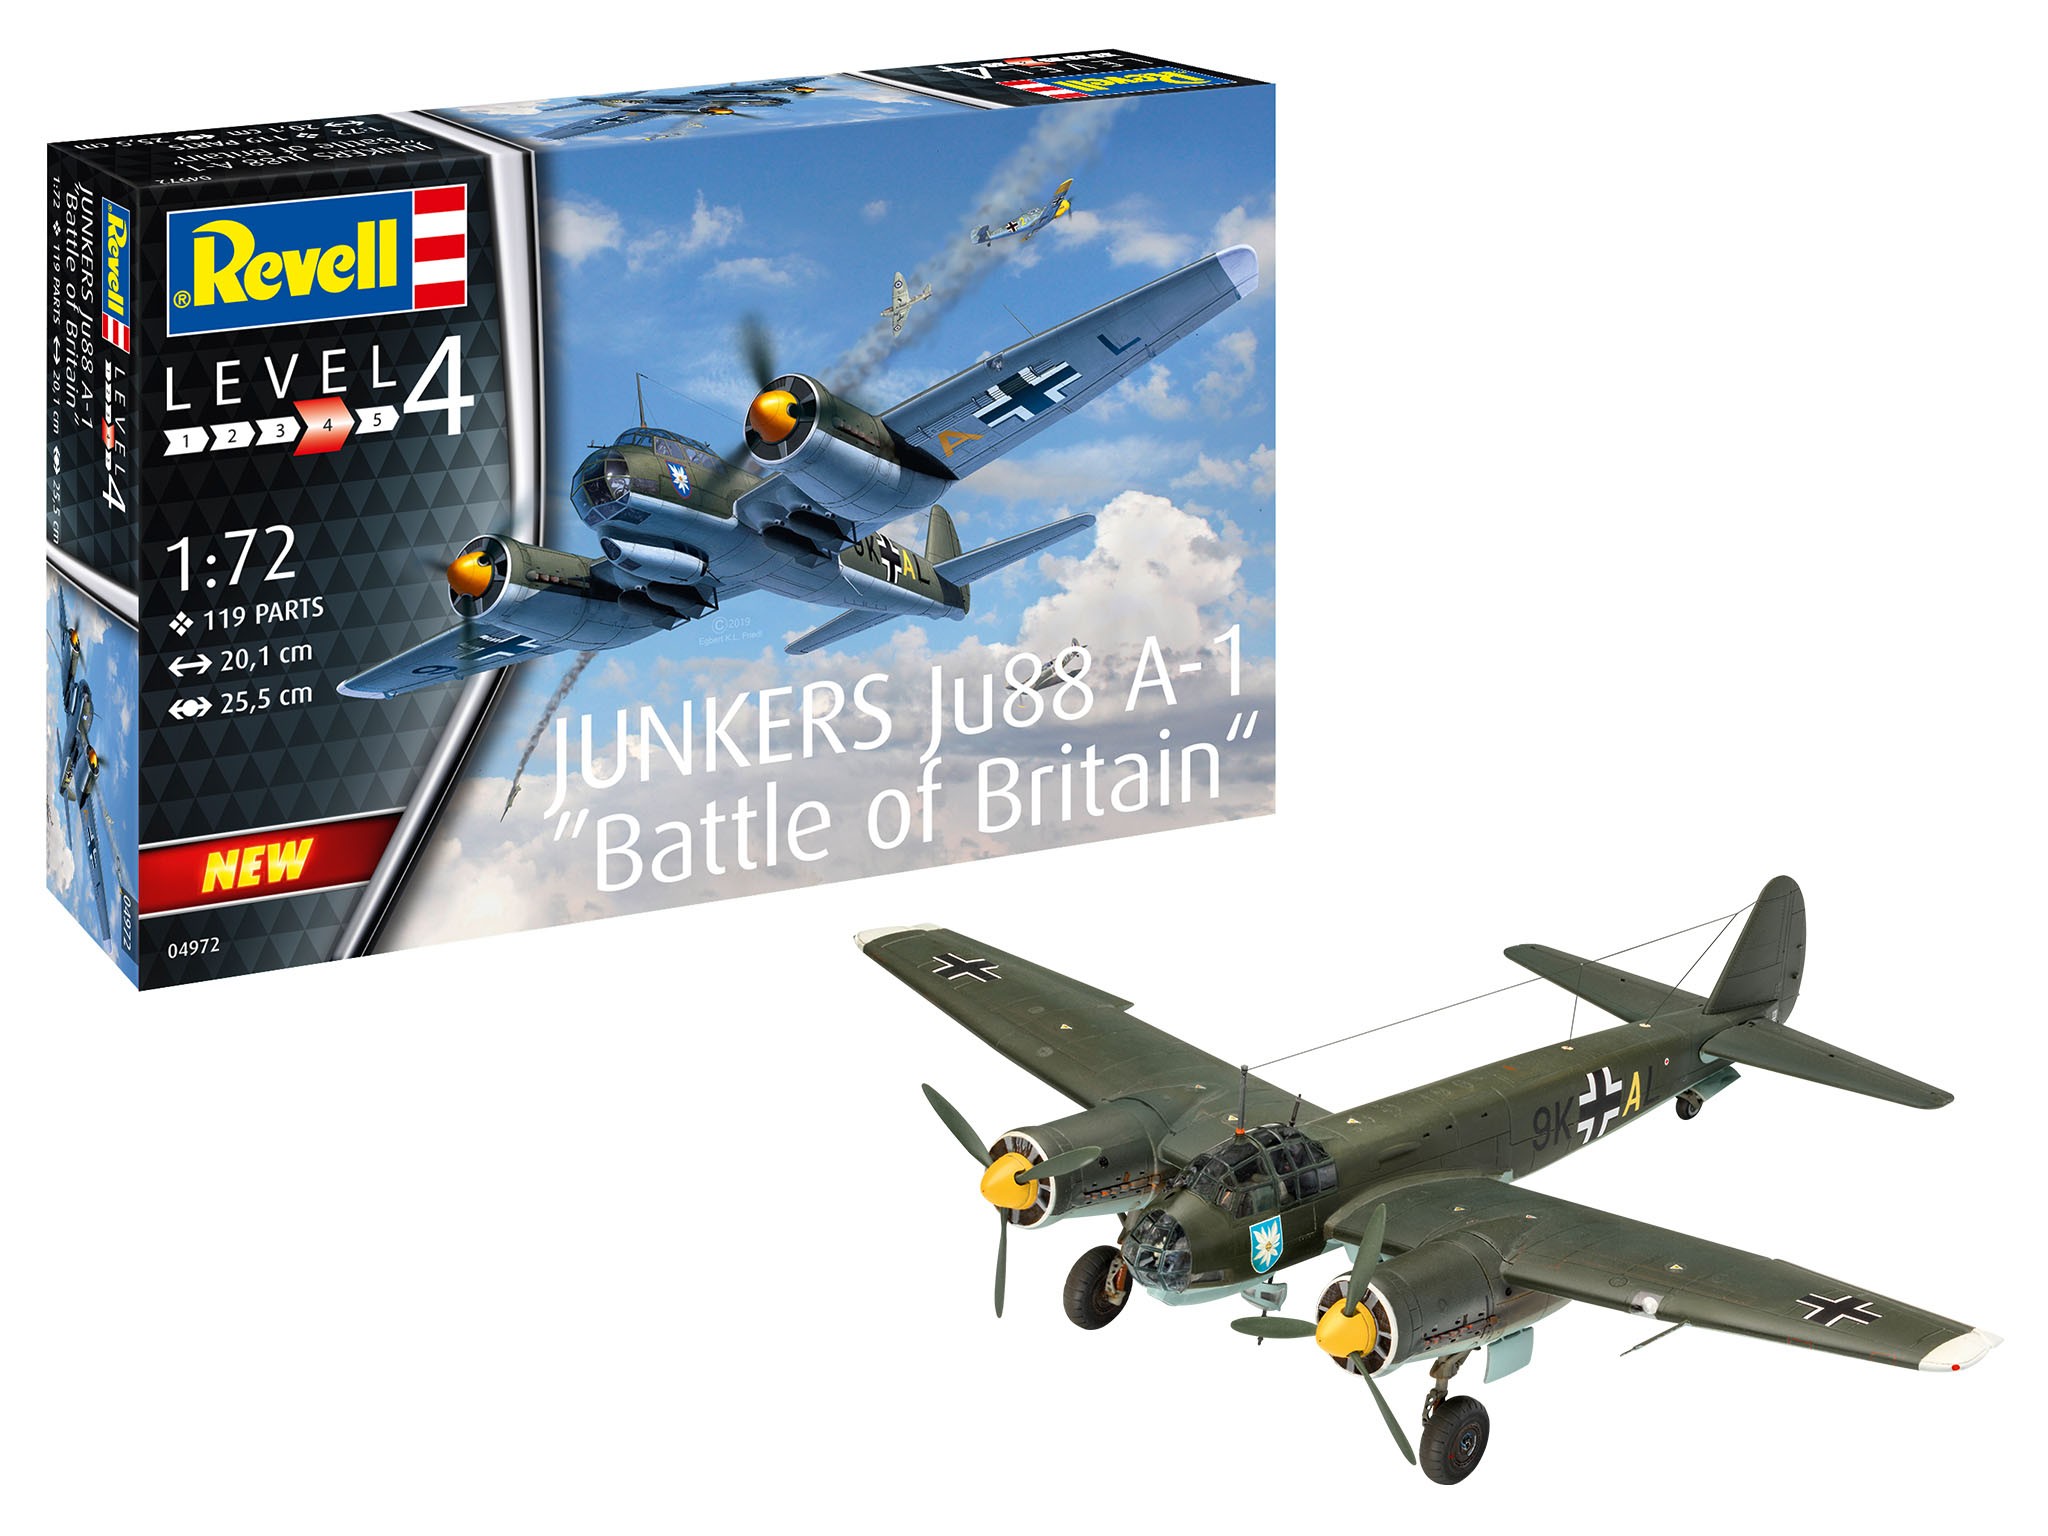 Revell 04972 Junkers Ju 88 A-1 Battle of Britain  1:72 